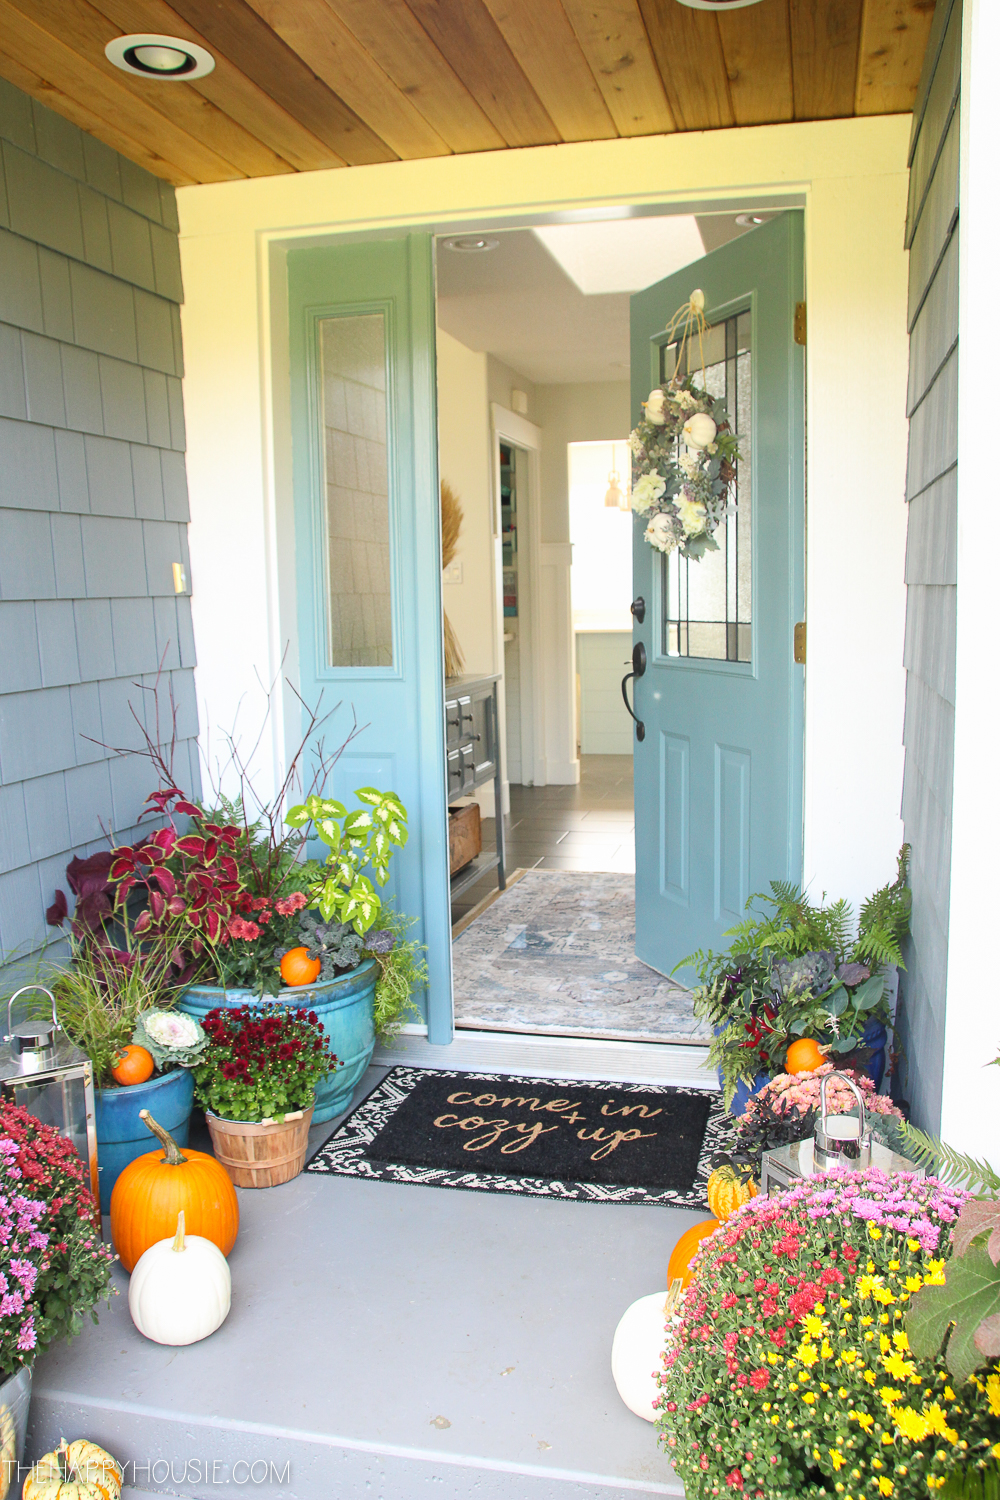 The front door ajar with planters of flowers and green plants.